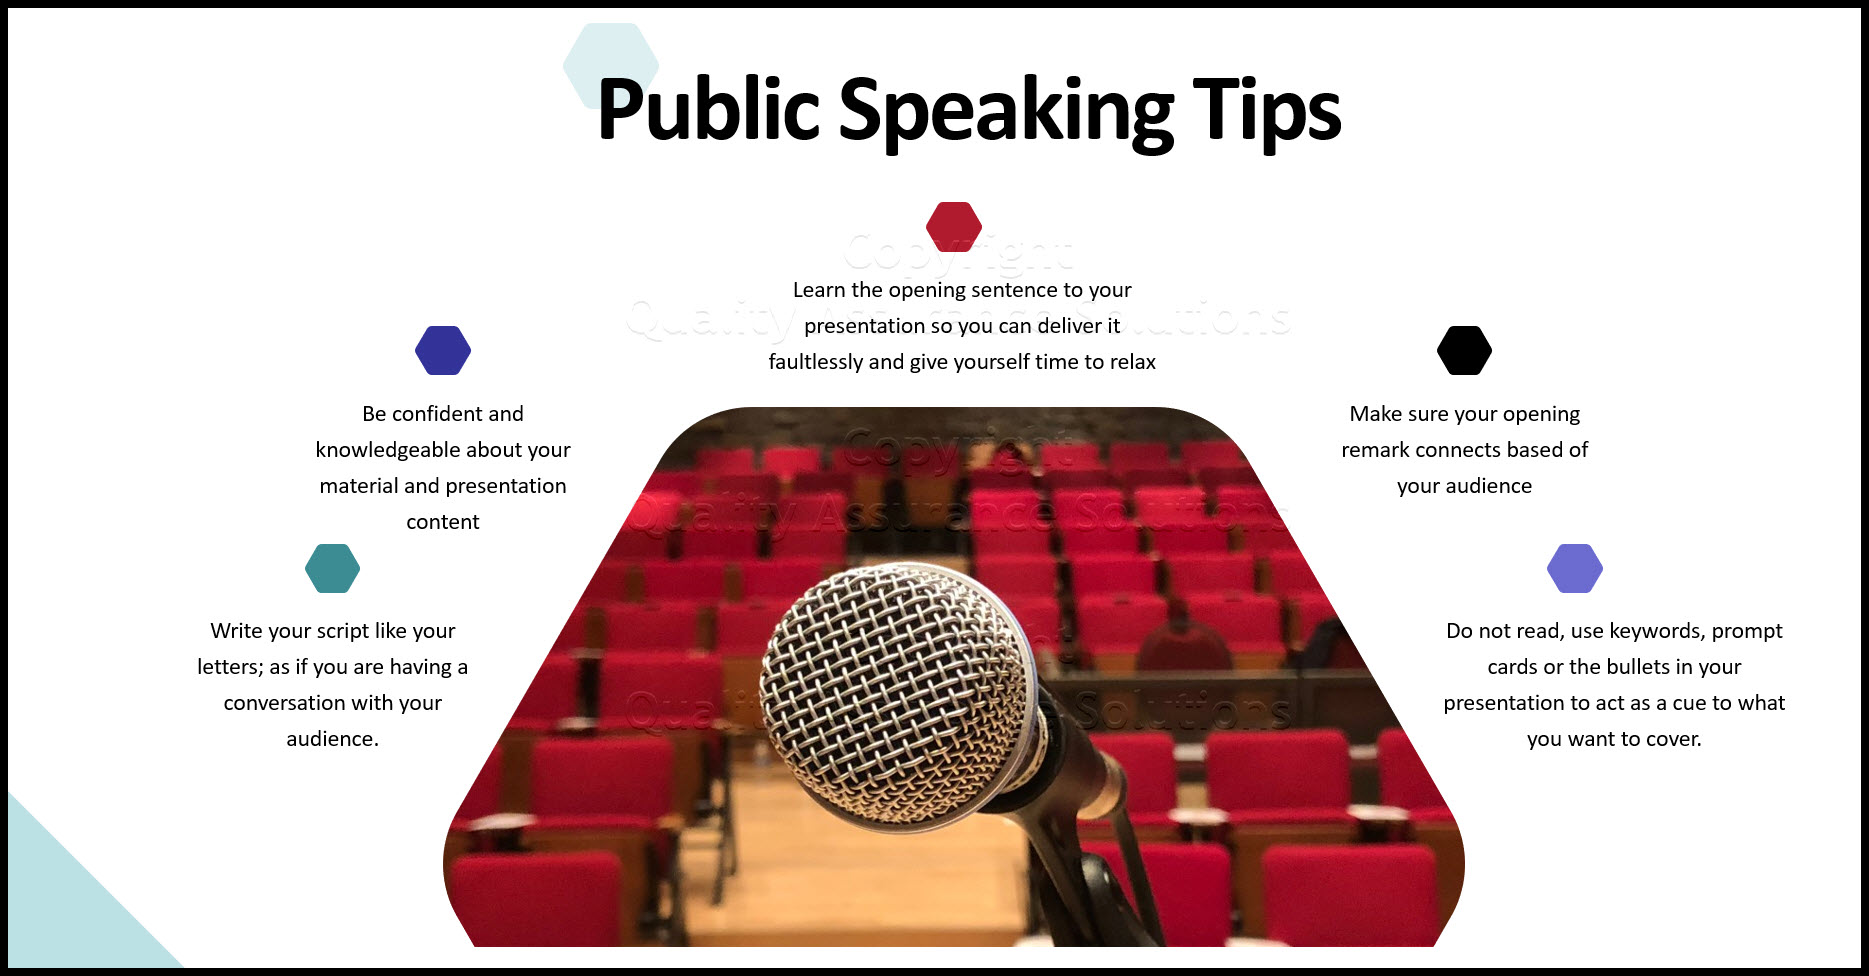 Cure fear of public speaking with these tips